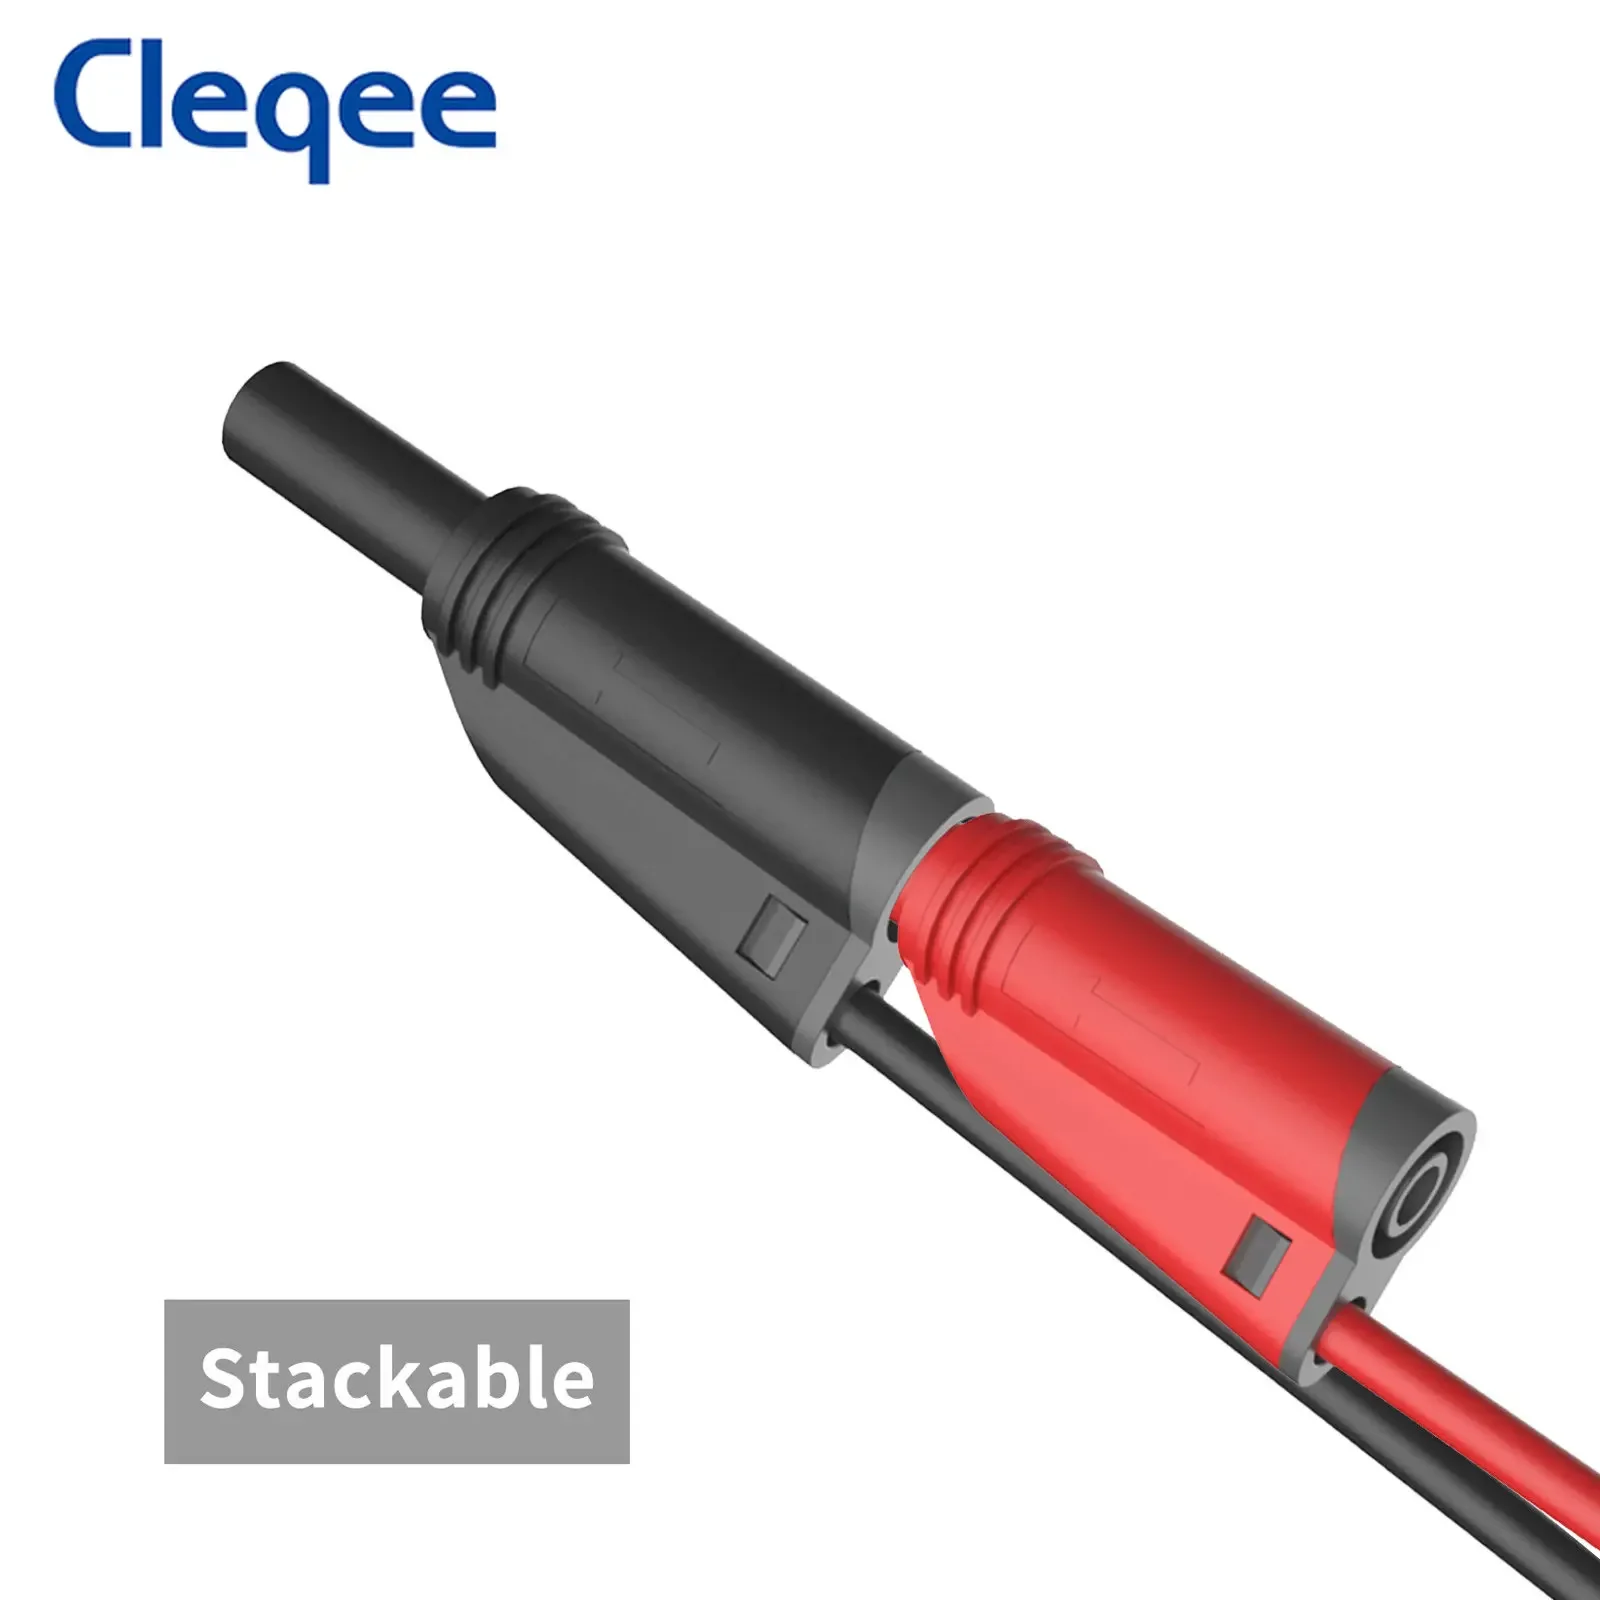 Cleqee P1010 BNC to Dual 4mm Stackable Banana Plug Test Lead Safe Probe Oscilloscope Cable 120CM 500V 5A